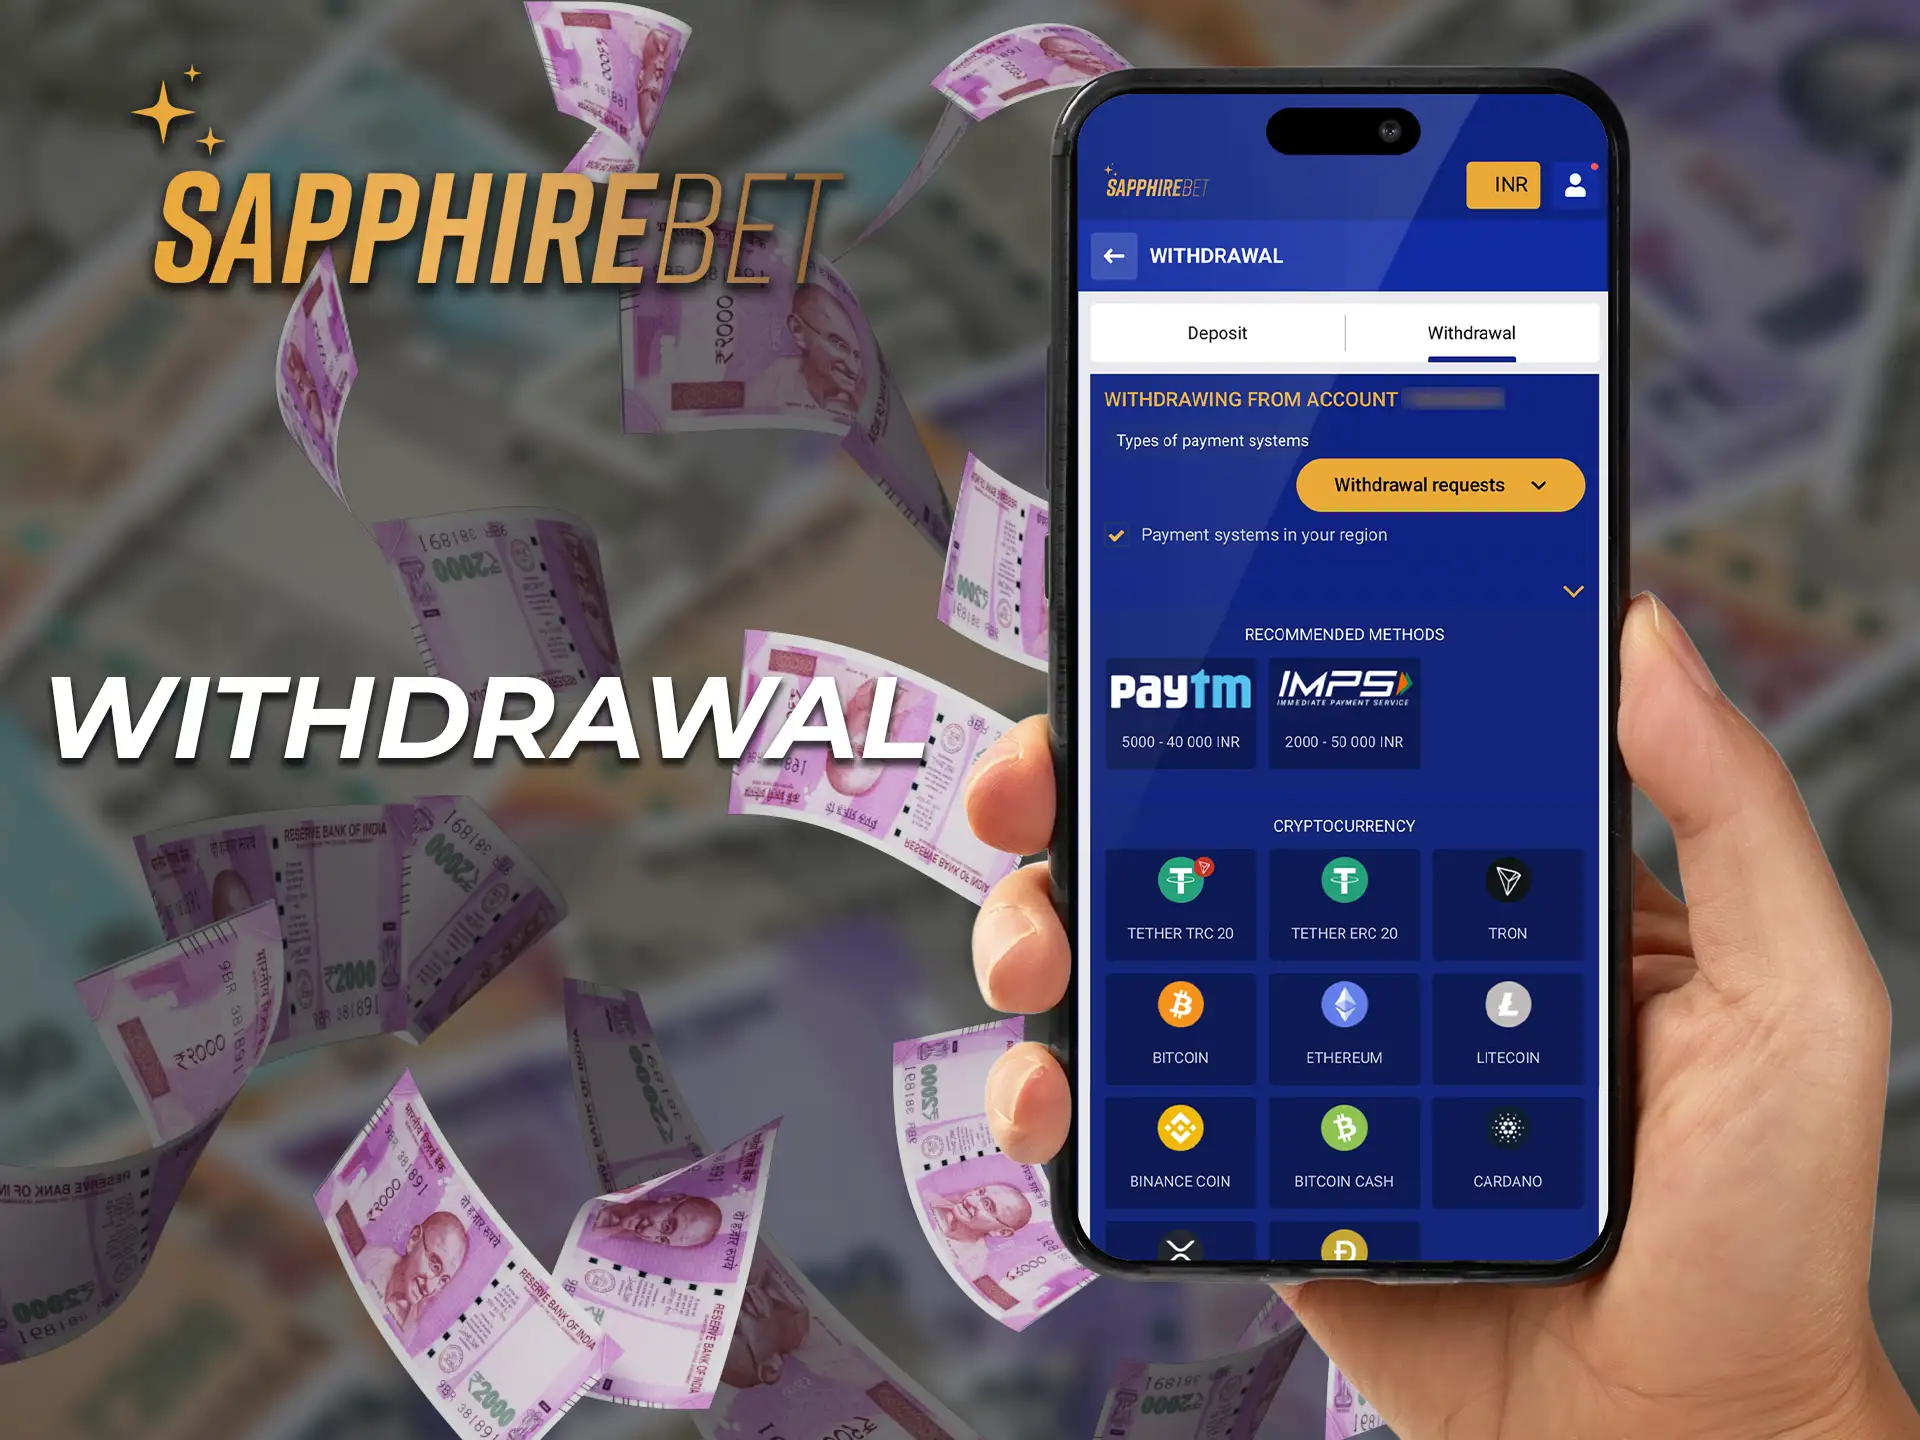 Log in and select your withdrawal method.